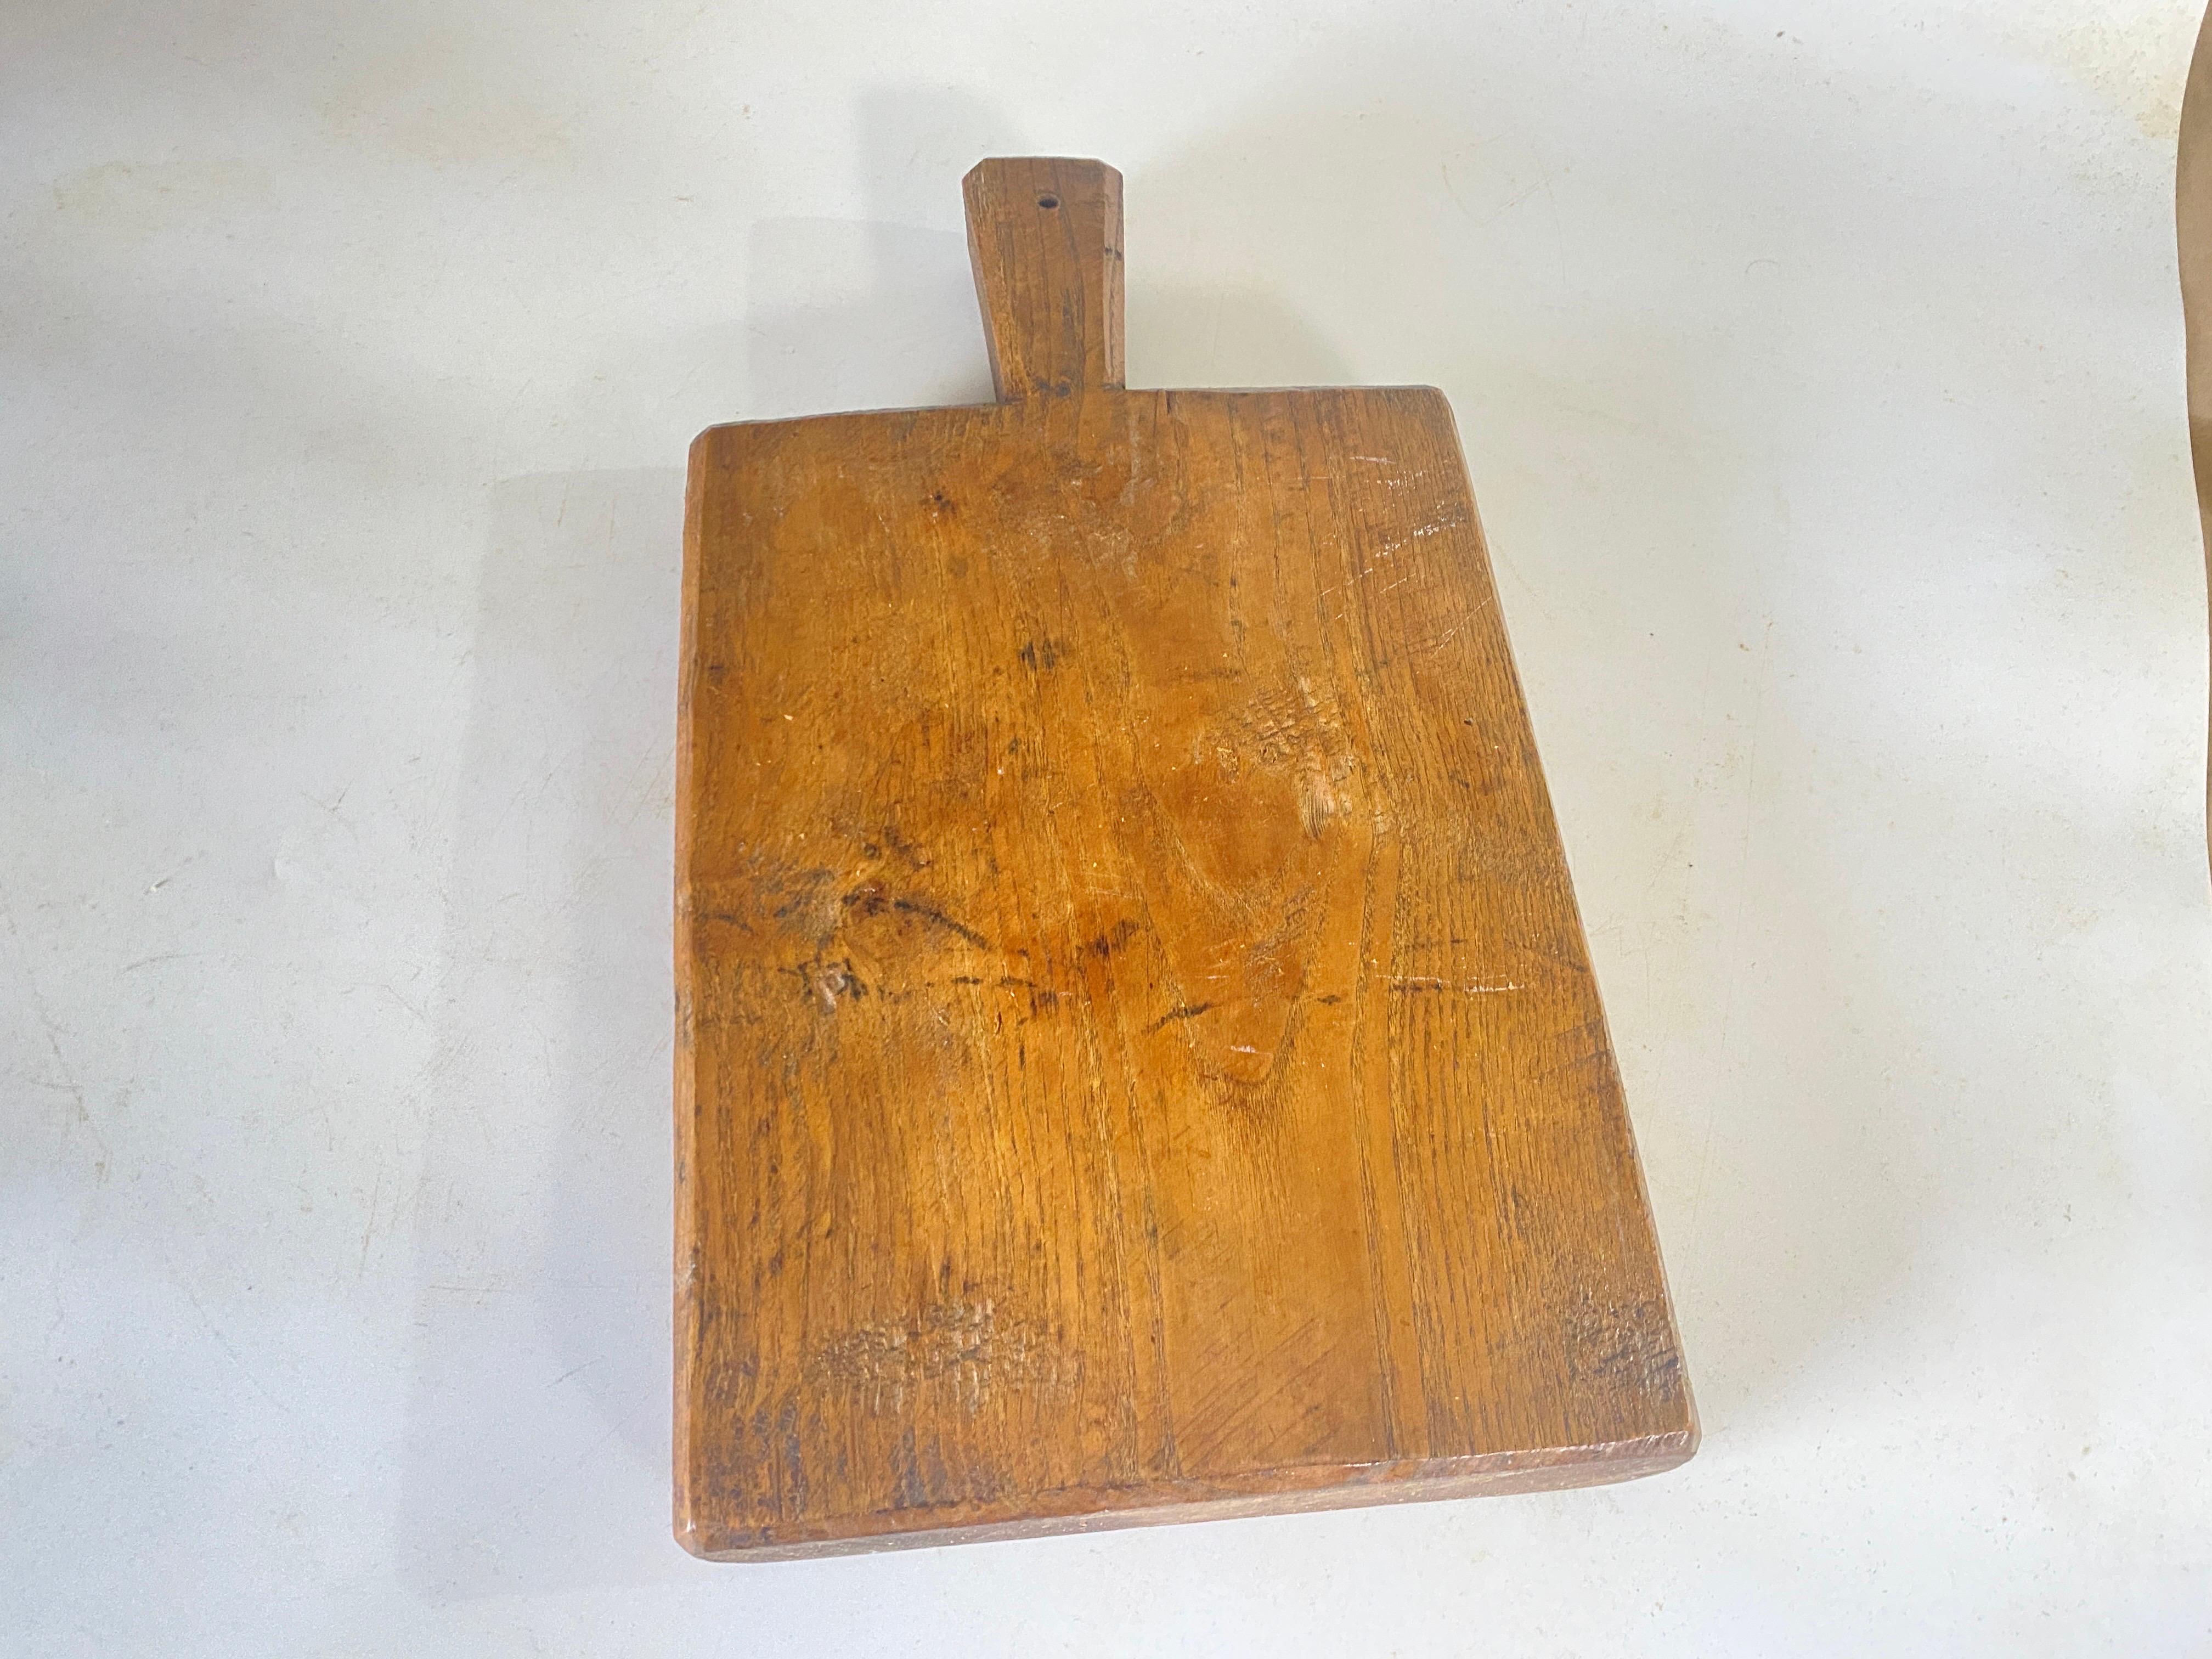 Large Wooden Chopping or Cutting Board Old Patina, Brown Color France 20th  In Fair Condition For Sale In Auribeau sur Siagne, FR